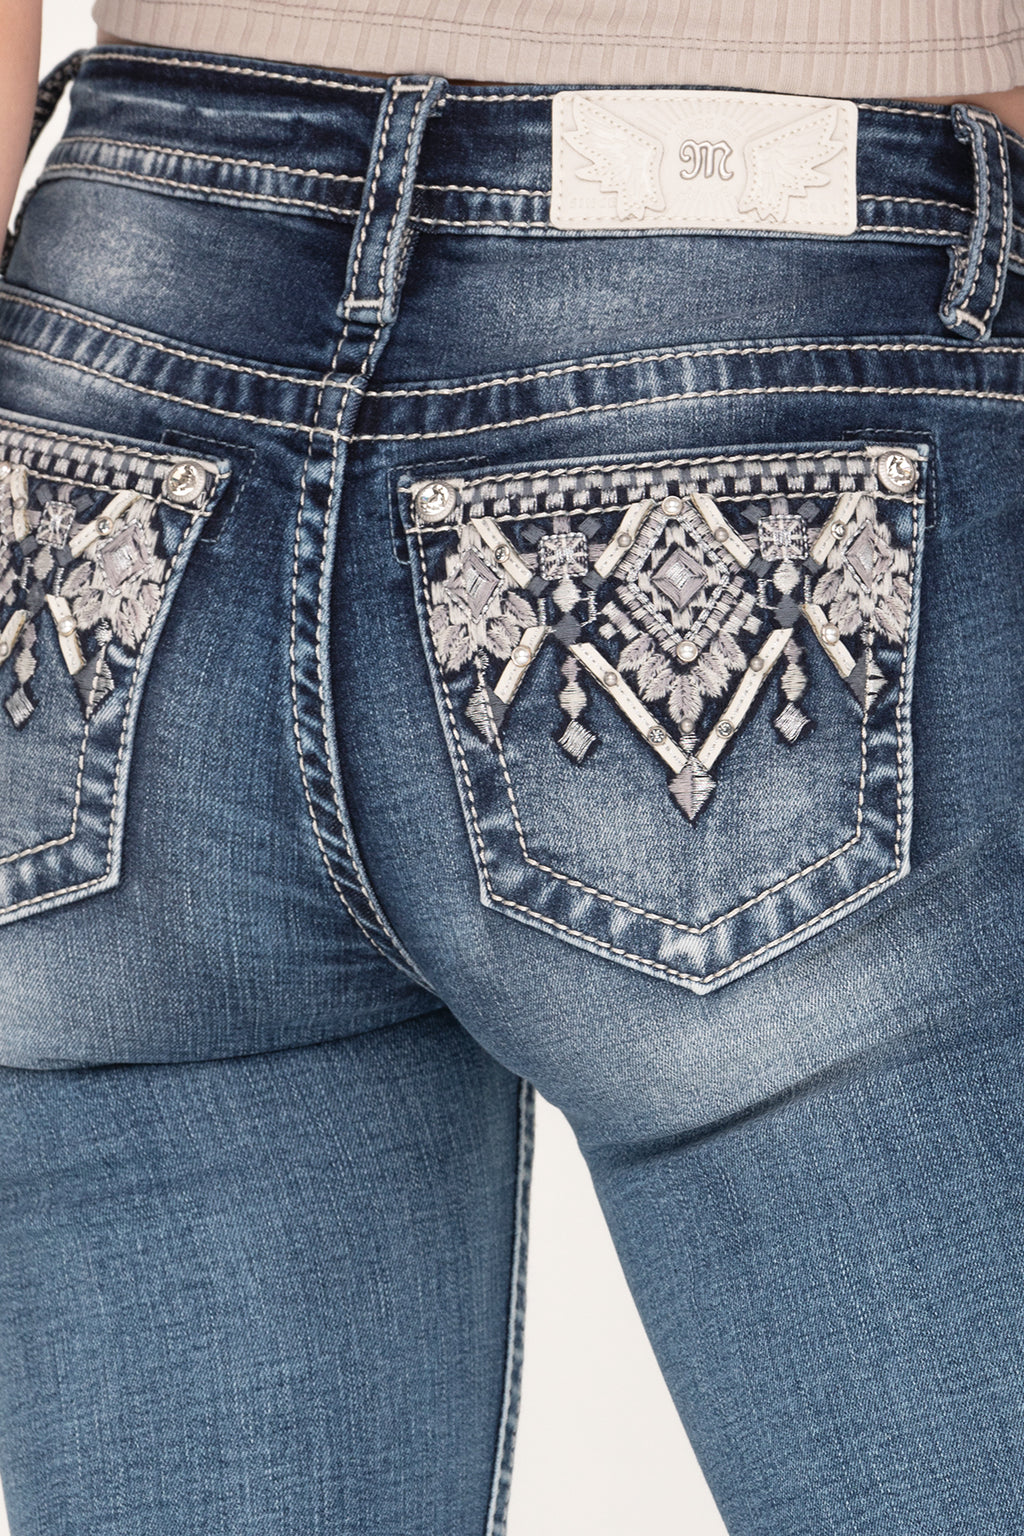 miss me jeans peace sign crystal pockets